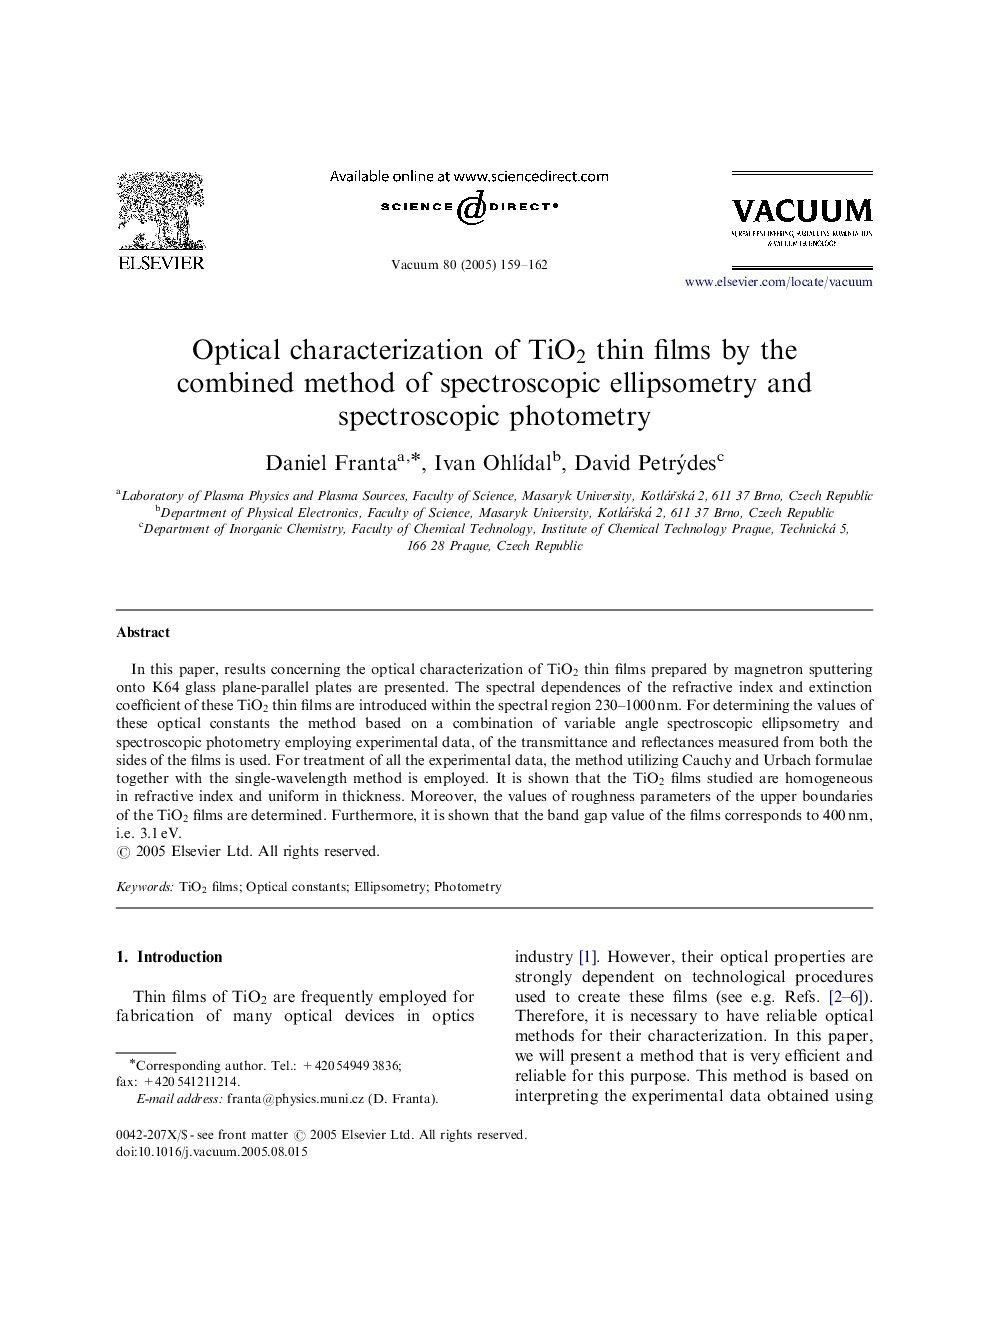 Optical characterization of TiO2 thin films by the combined method of spectroscopic ellipsometry and spectroscopic photometry